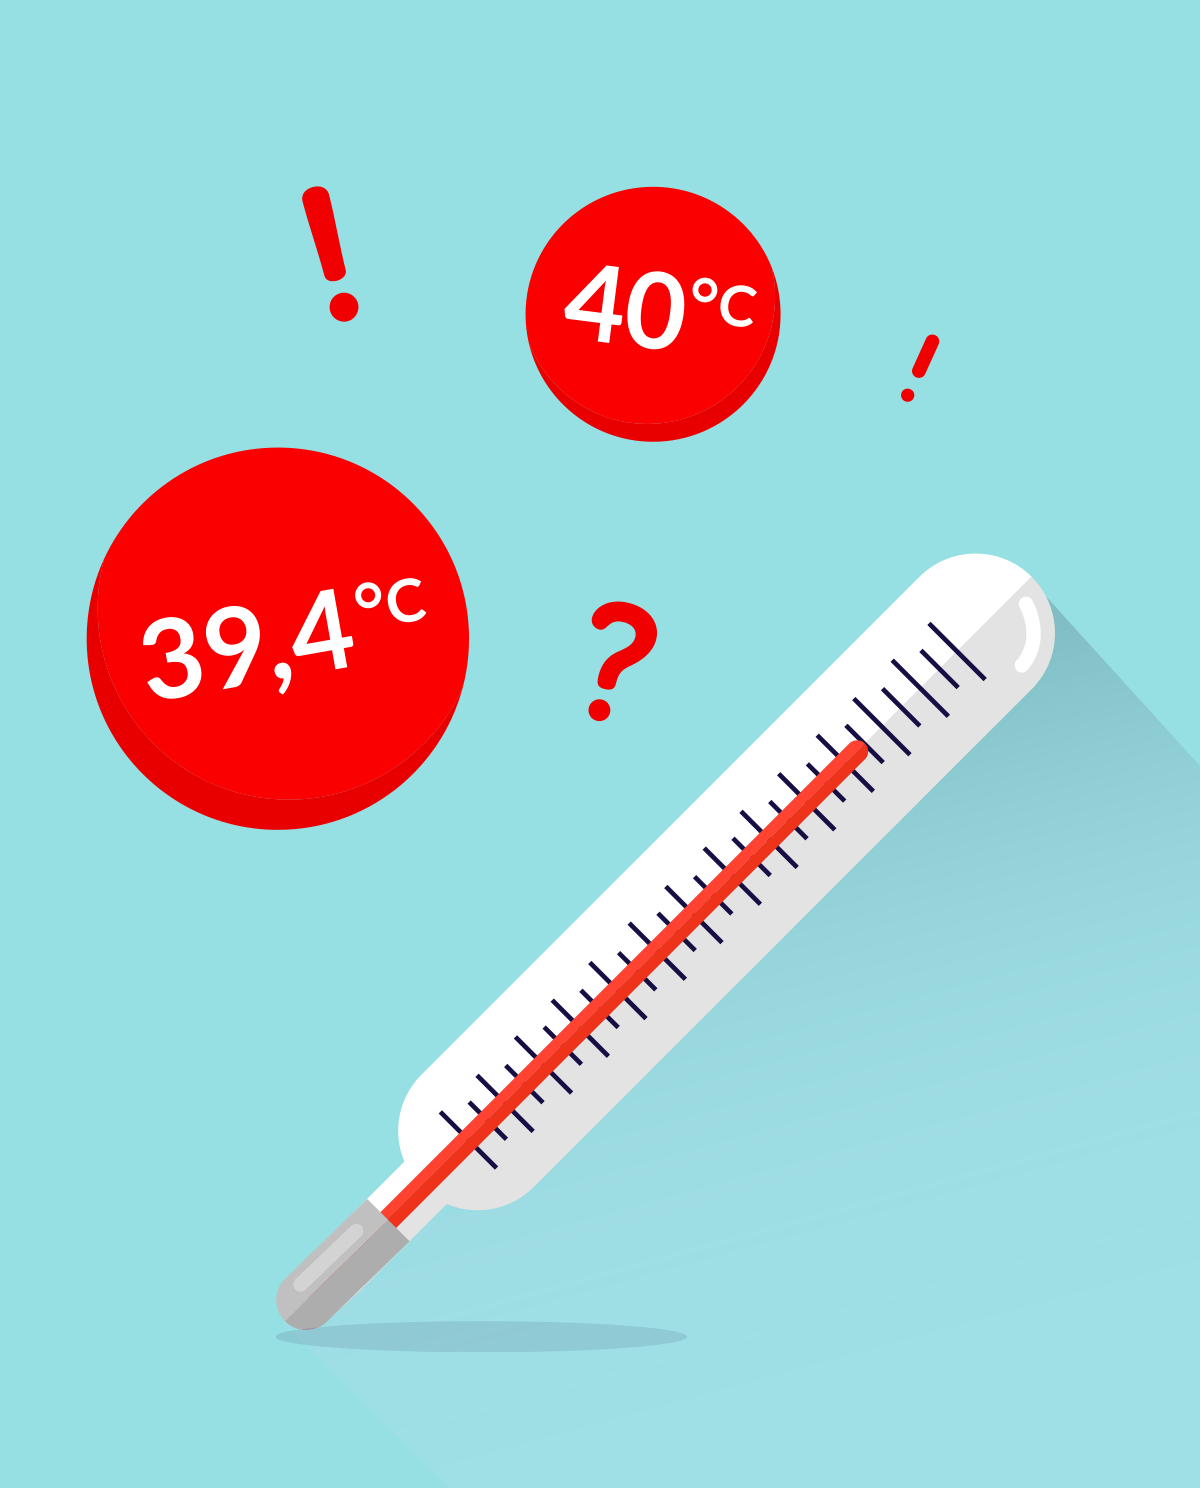 Fever - what is it and how can we measure it to prescribe medication?